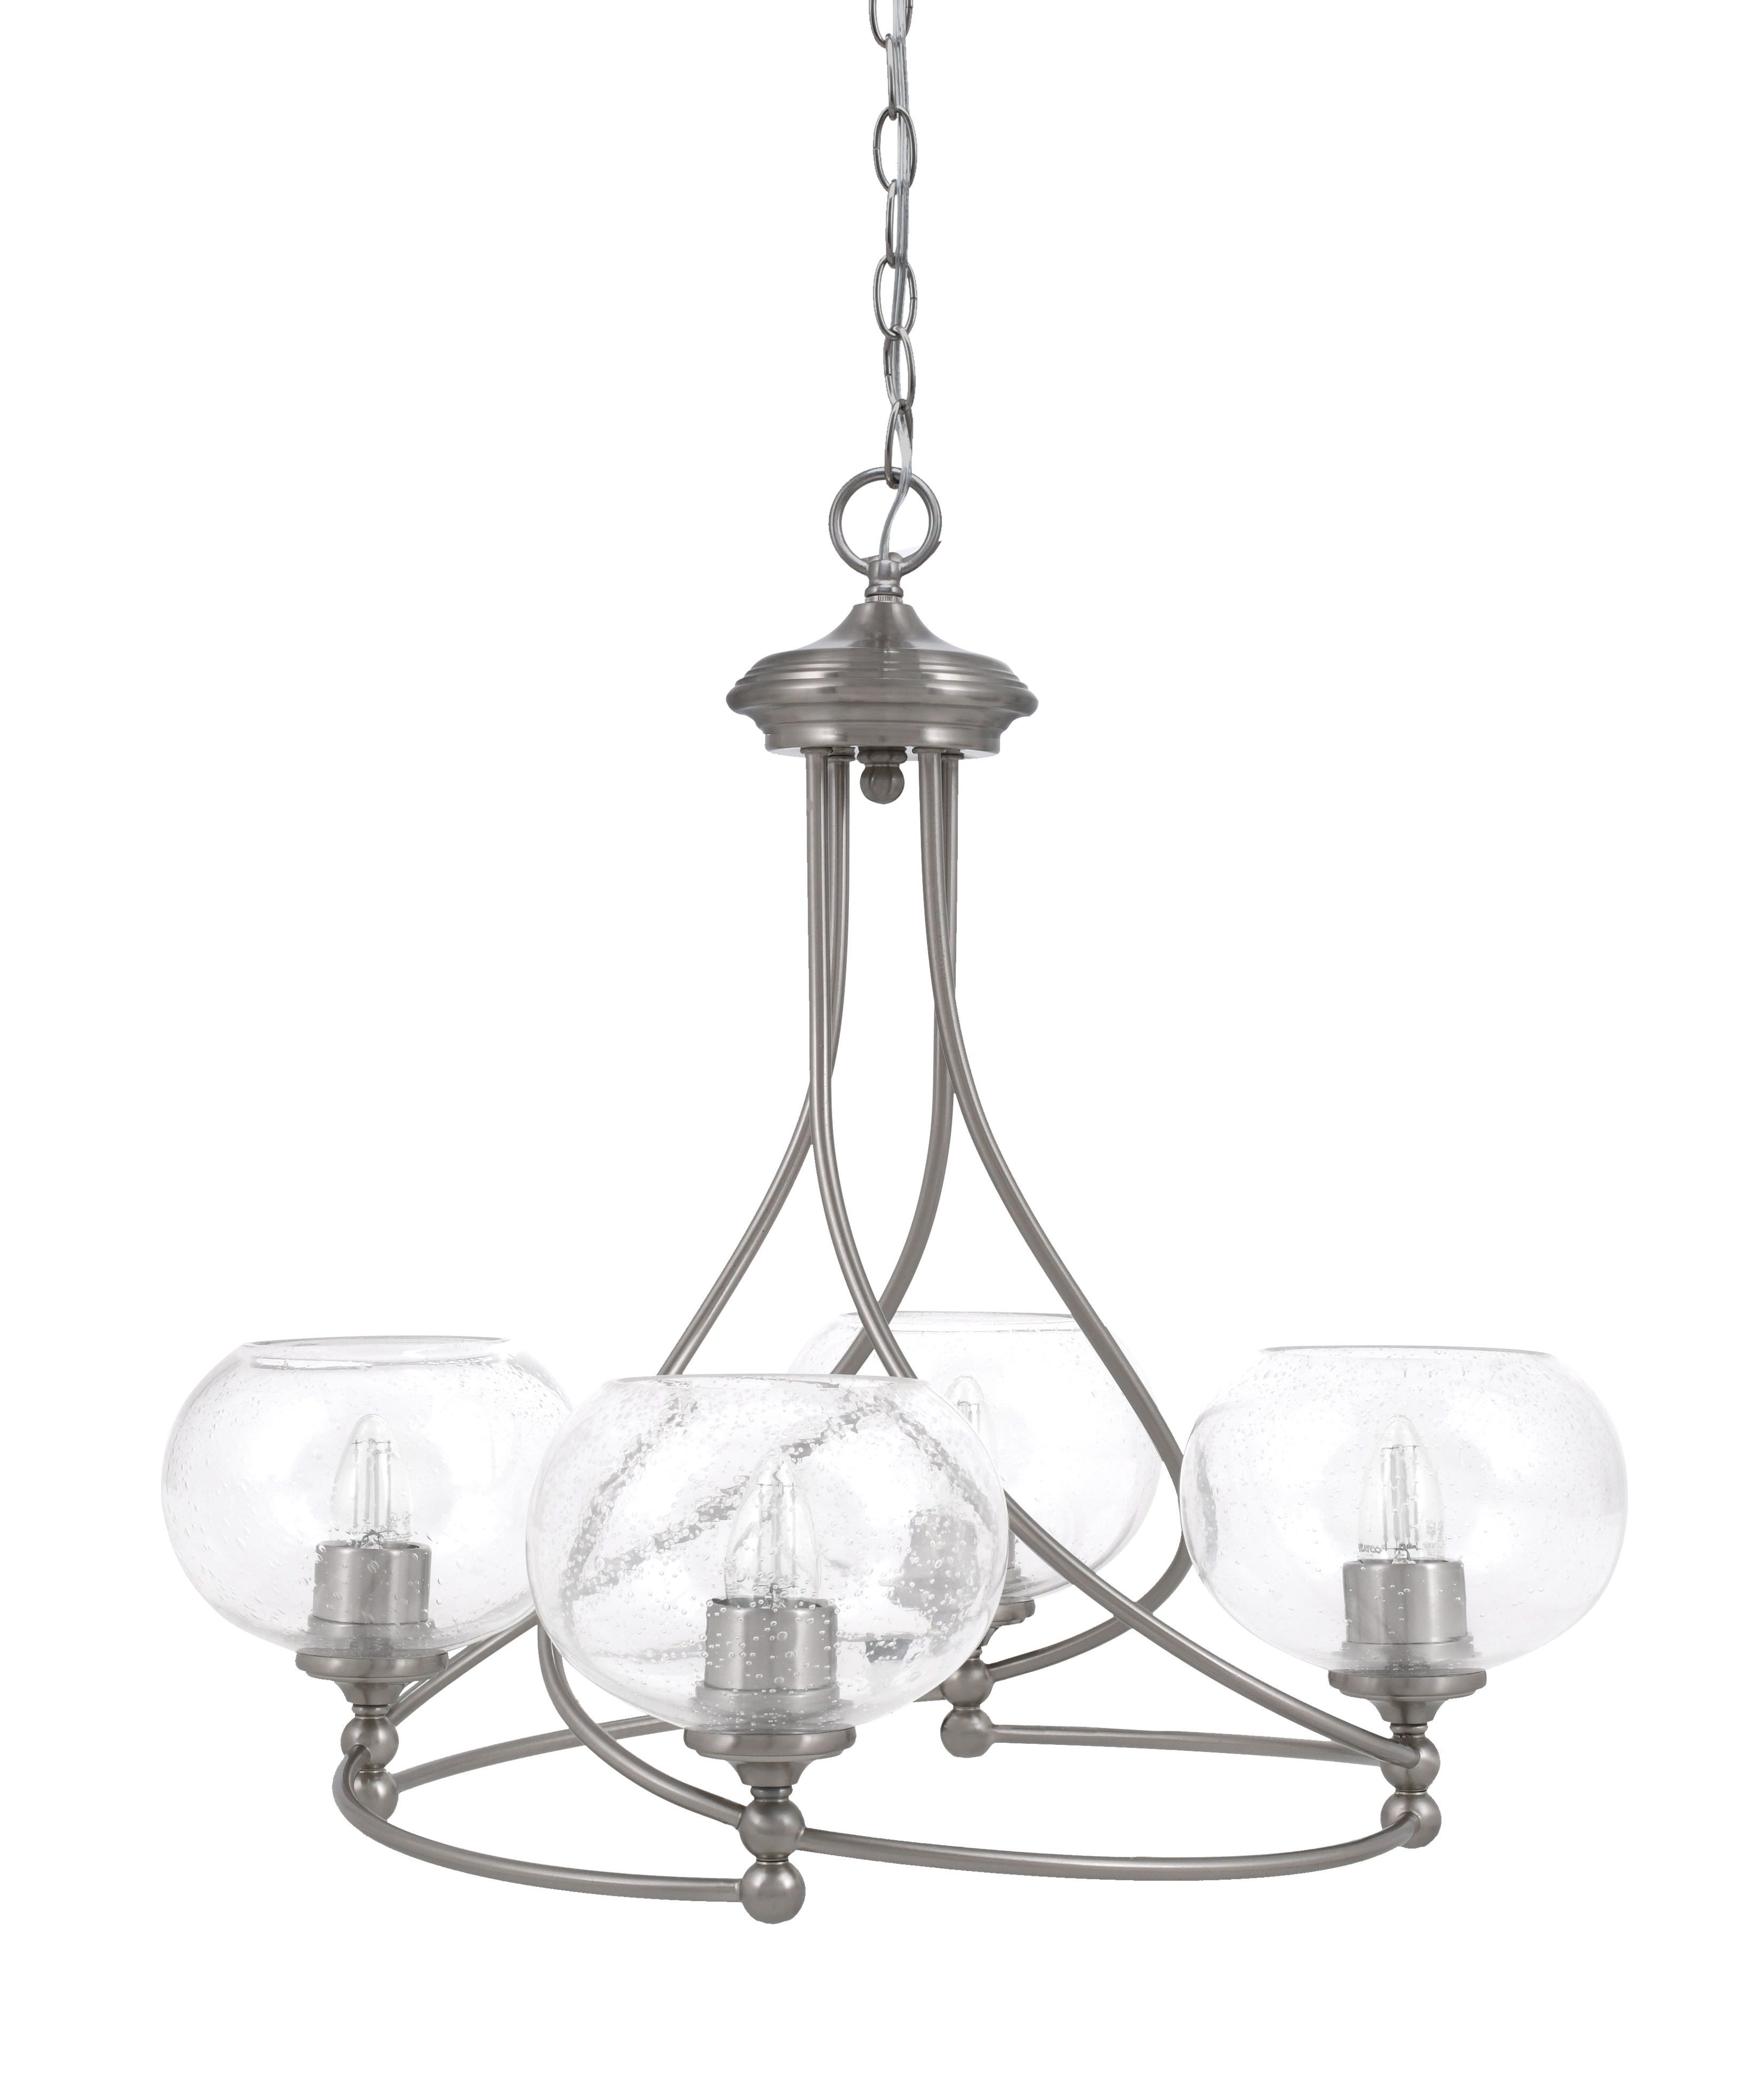 Toltec Lighting 904-BN-202 Capri Uplight, 4 Light, Chandelier Shown In Brushed Nickel Finish With 7" Clear Bubble Glass